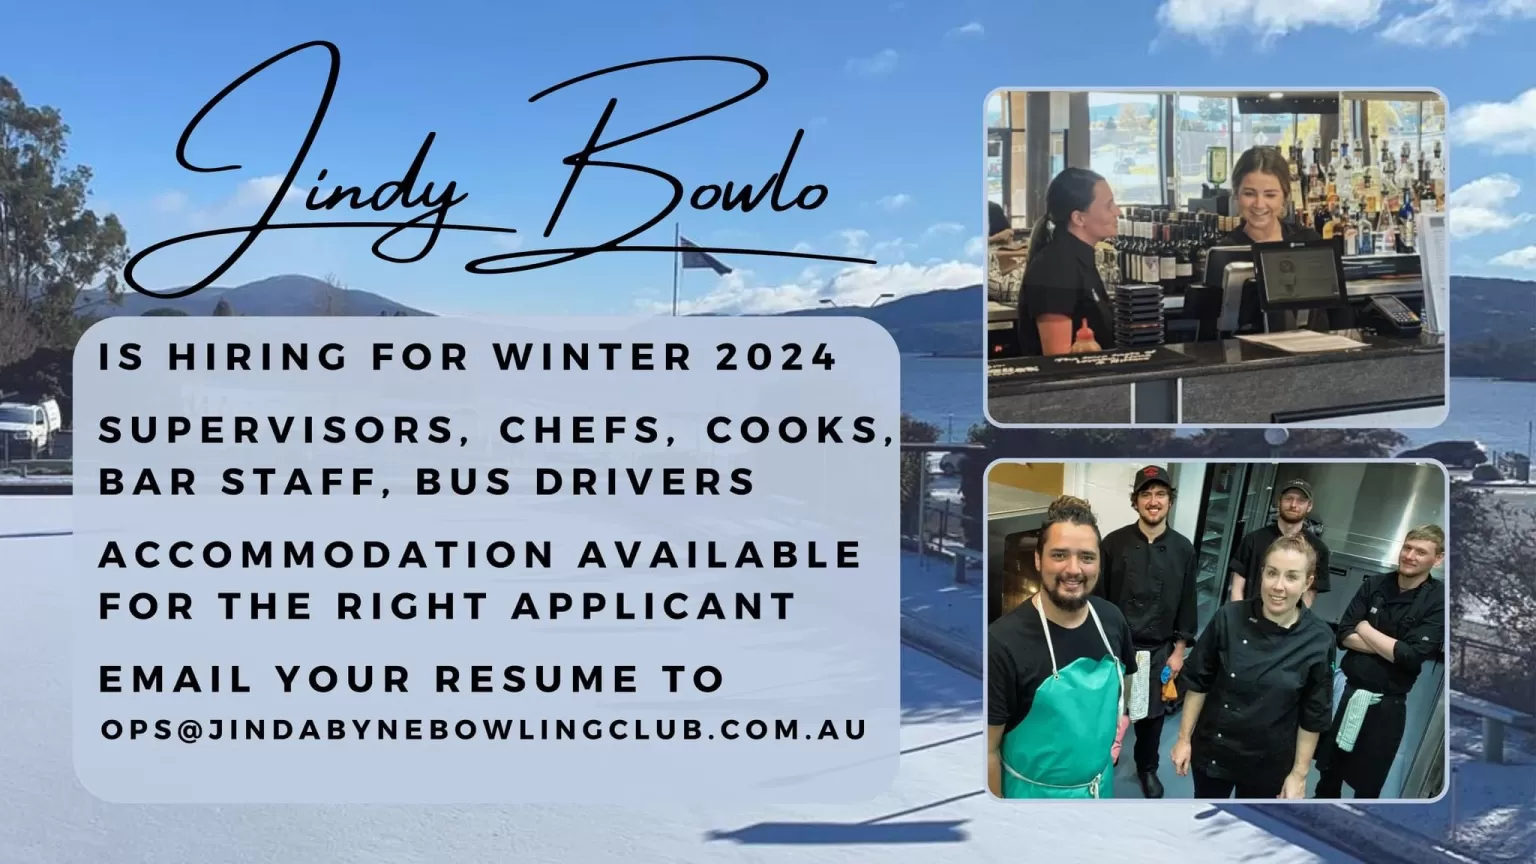 Jindy Bowlo is hiring for winter image